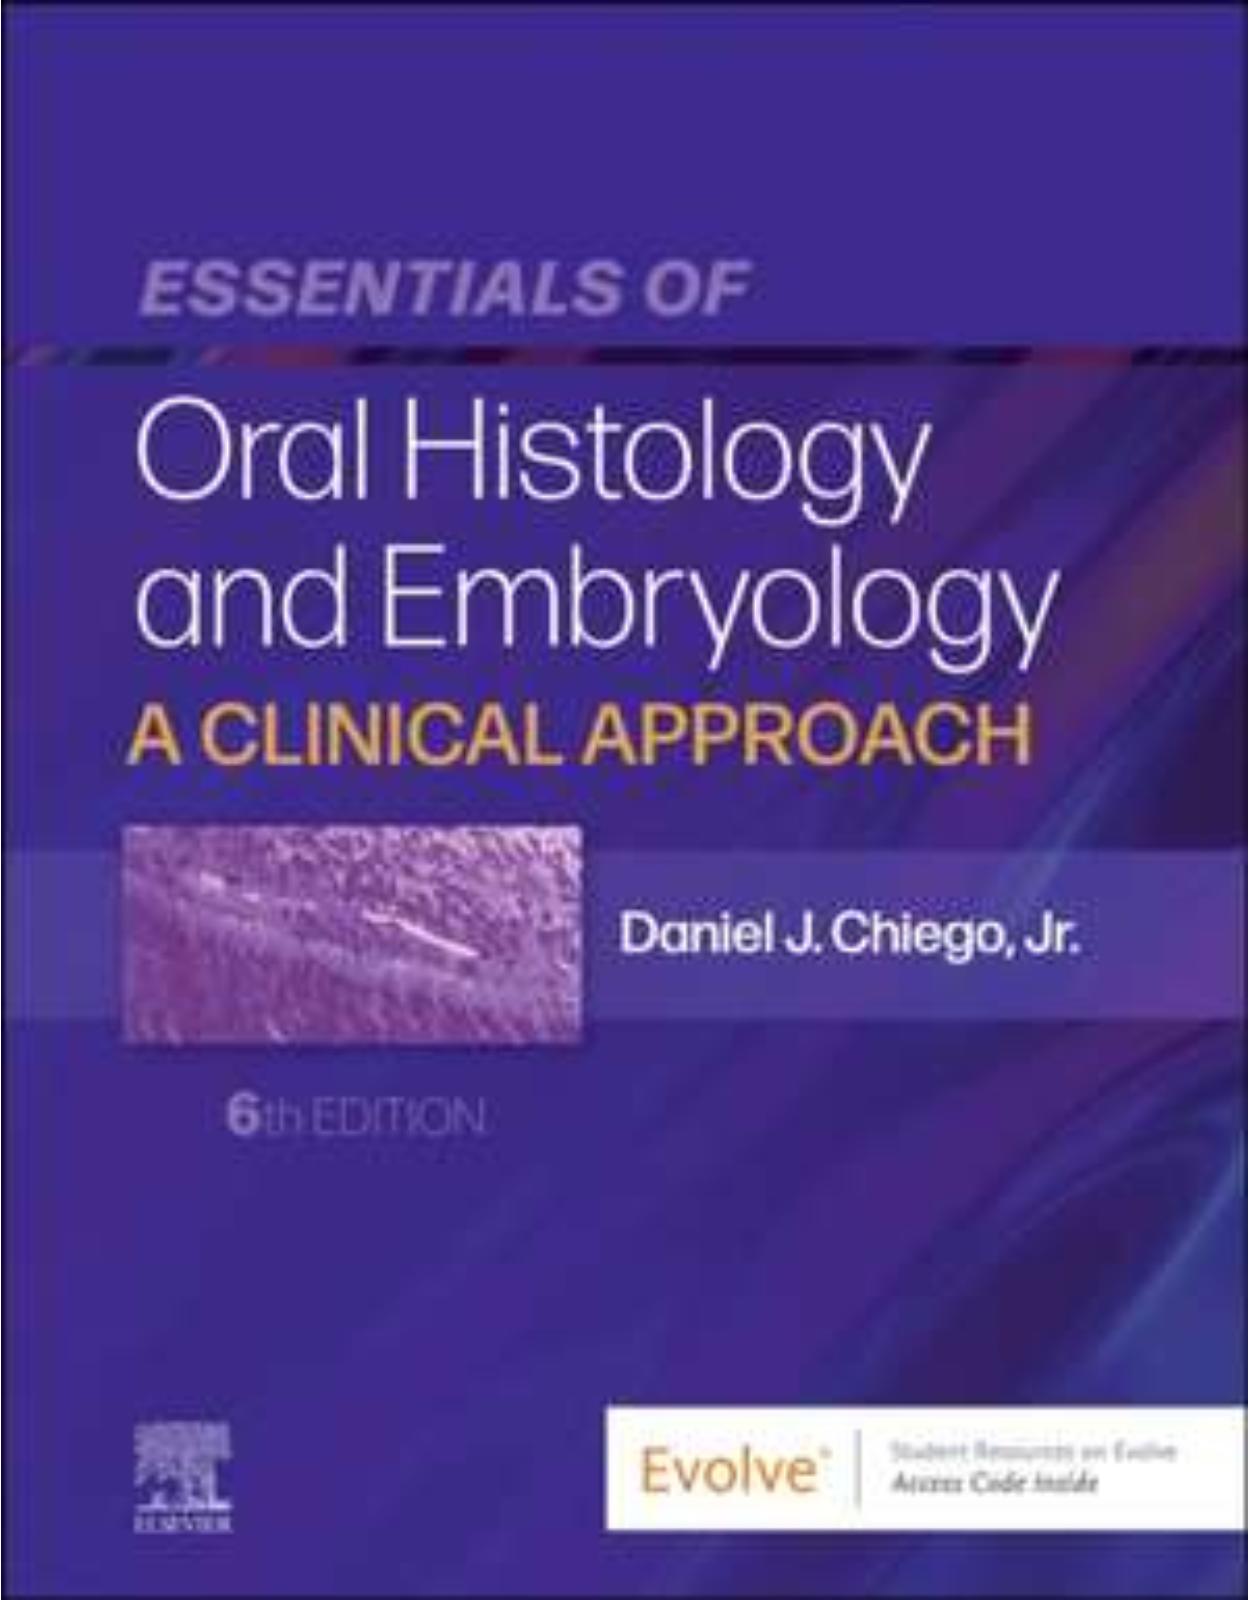 Essentials of Oral Histology and Embryology, 6th Edition